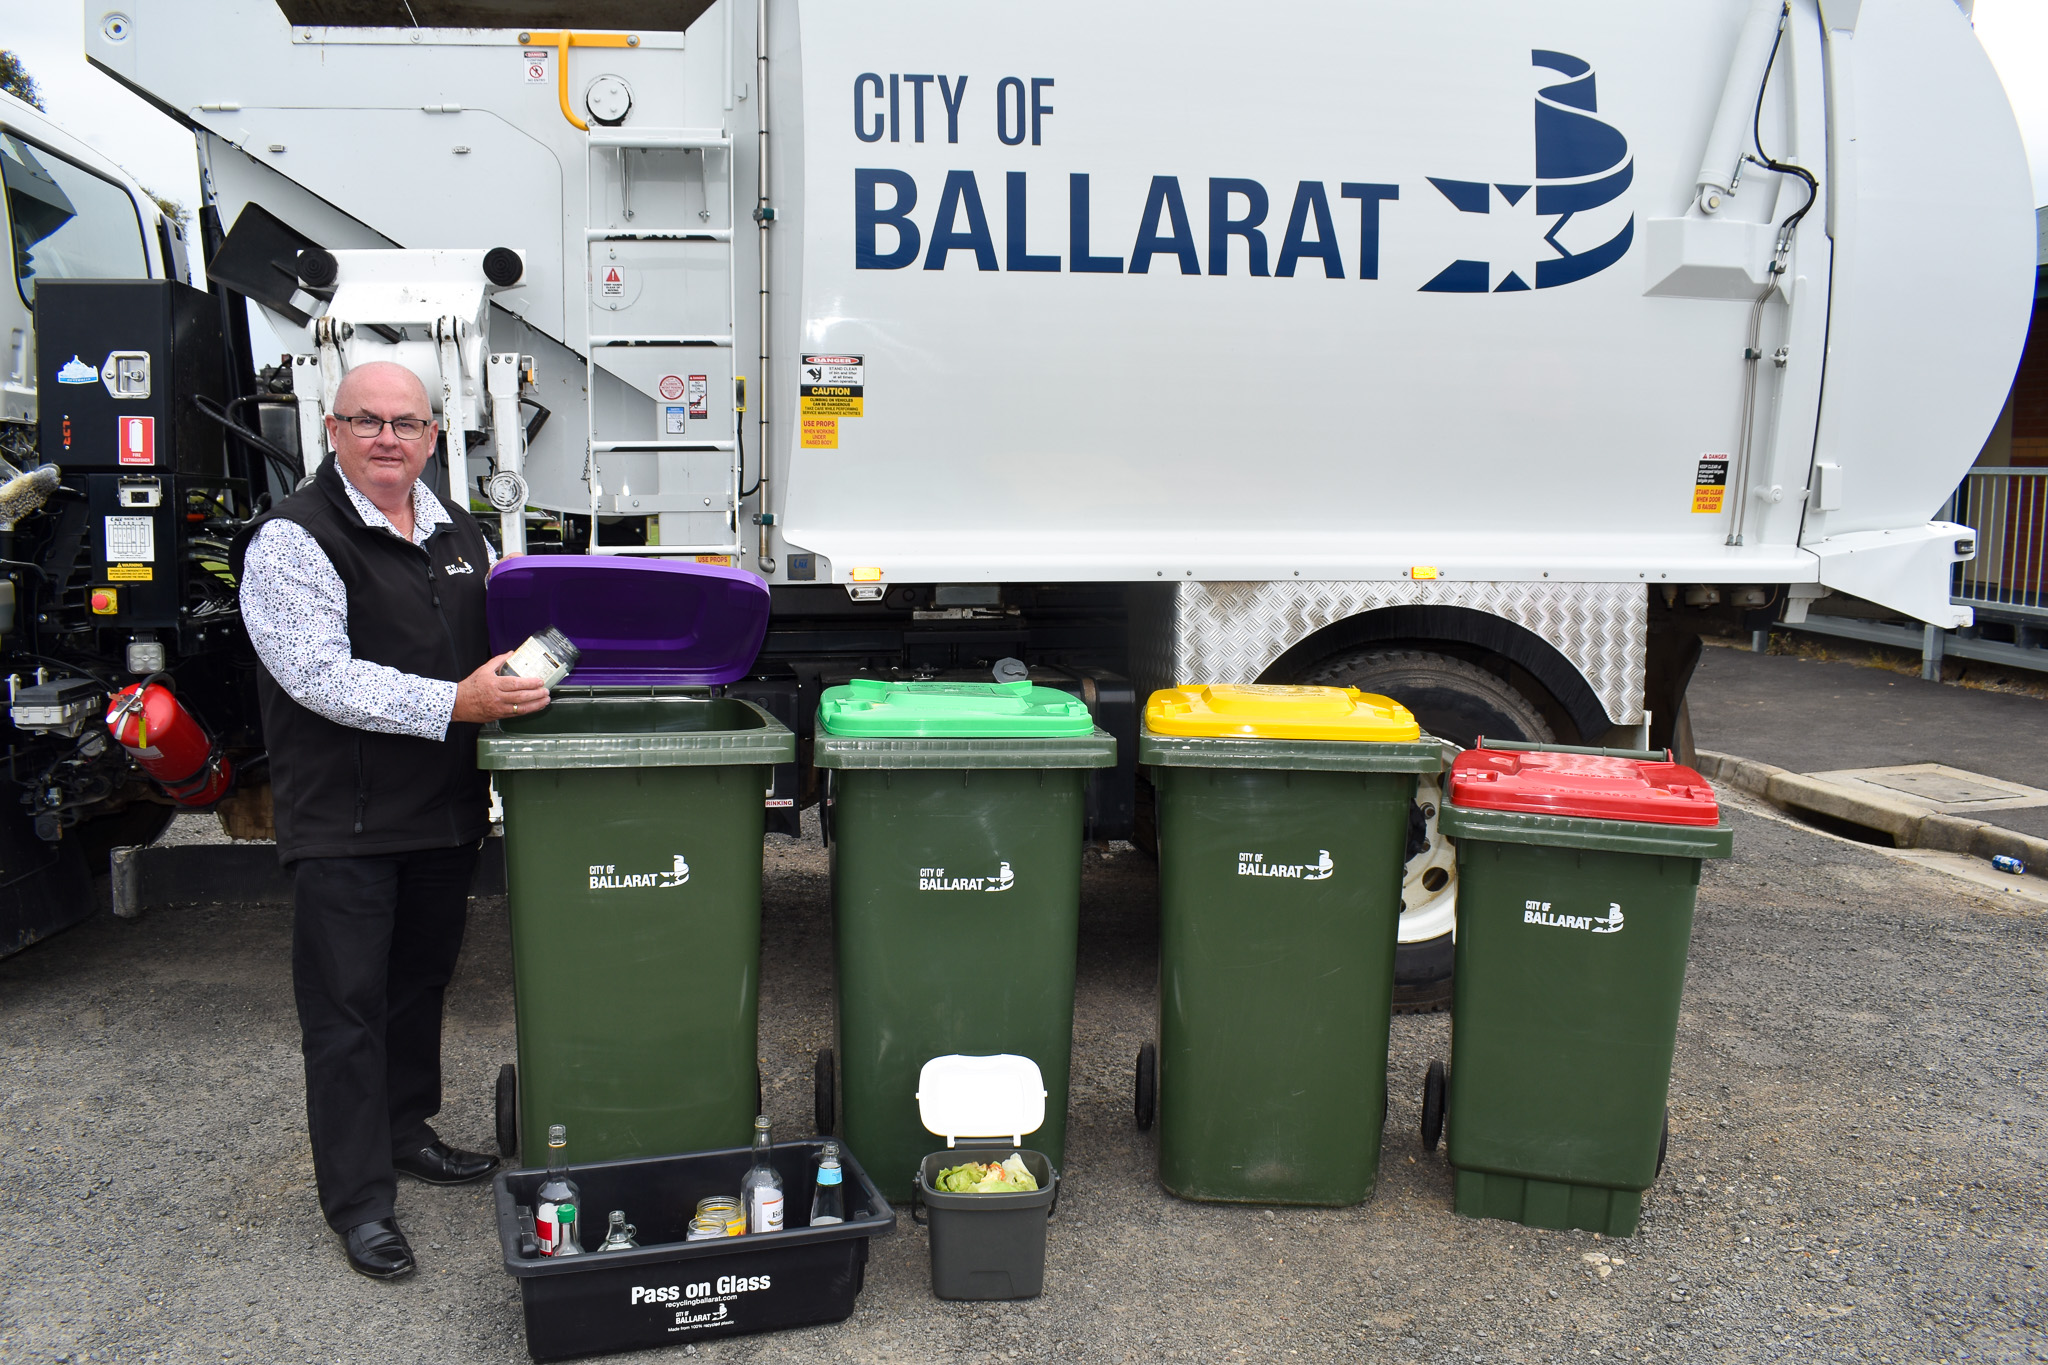 Cr Des Hudson with 4 bins in front of a city of ballarat rubbish truck